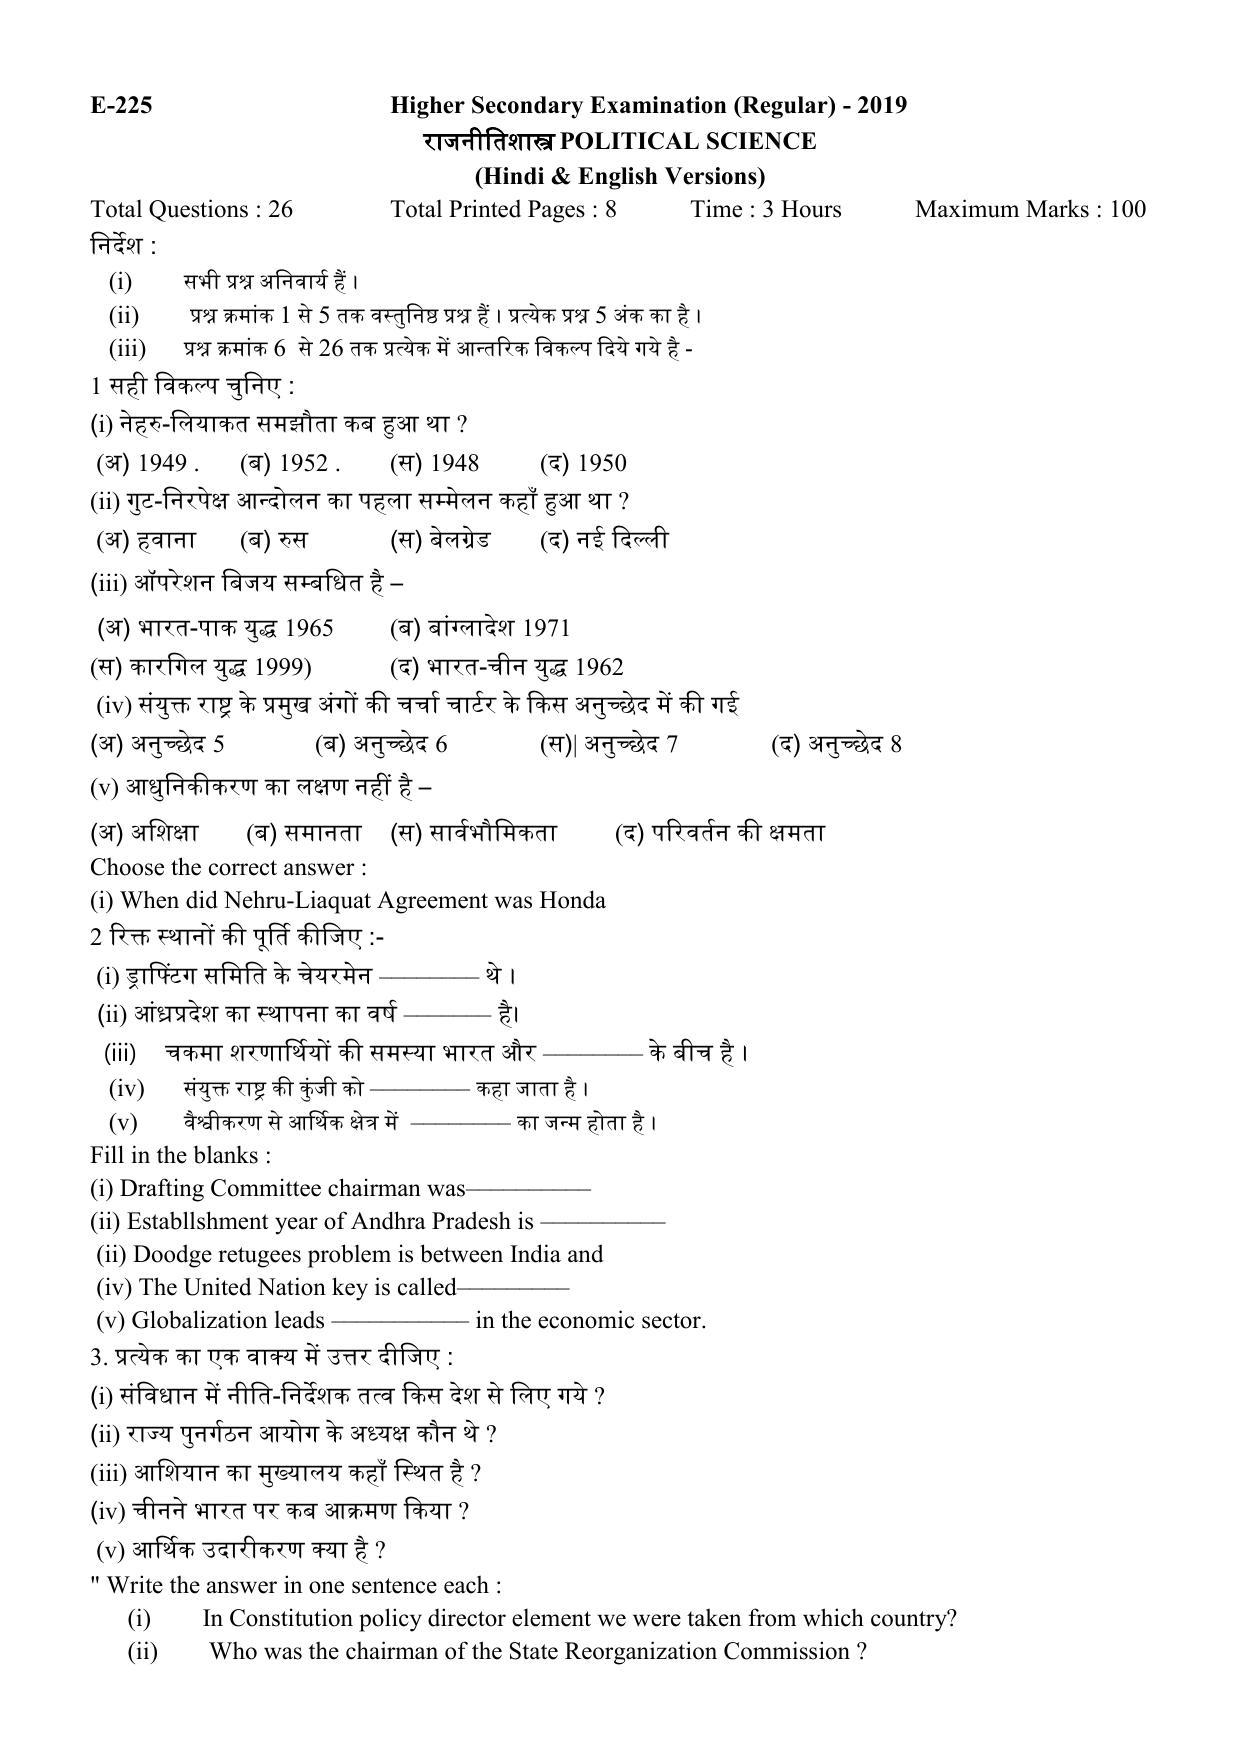 MP Board Class 12 Political Science 2019 Question Paper - Page 1